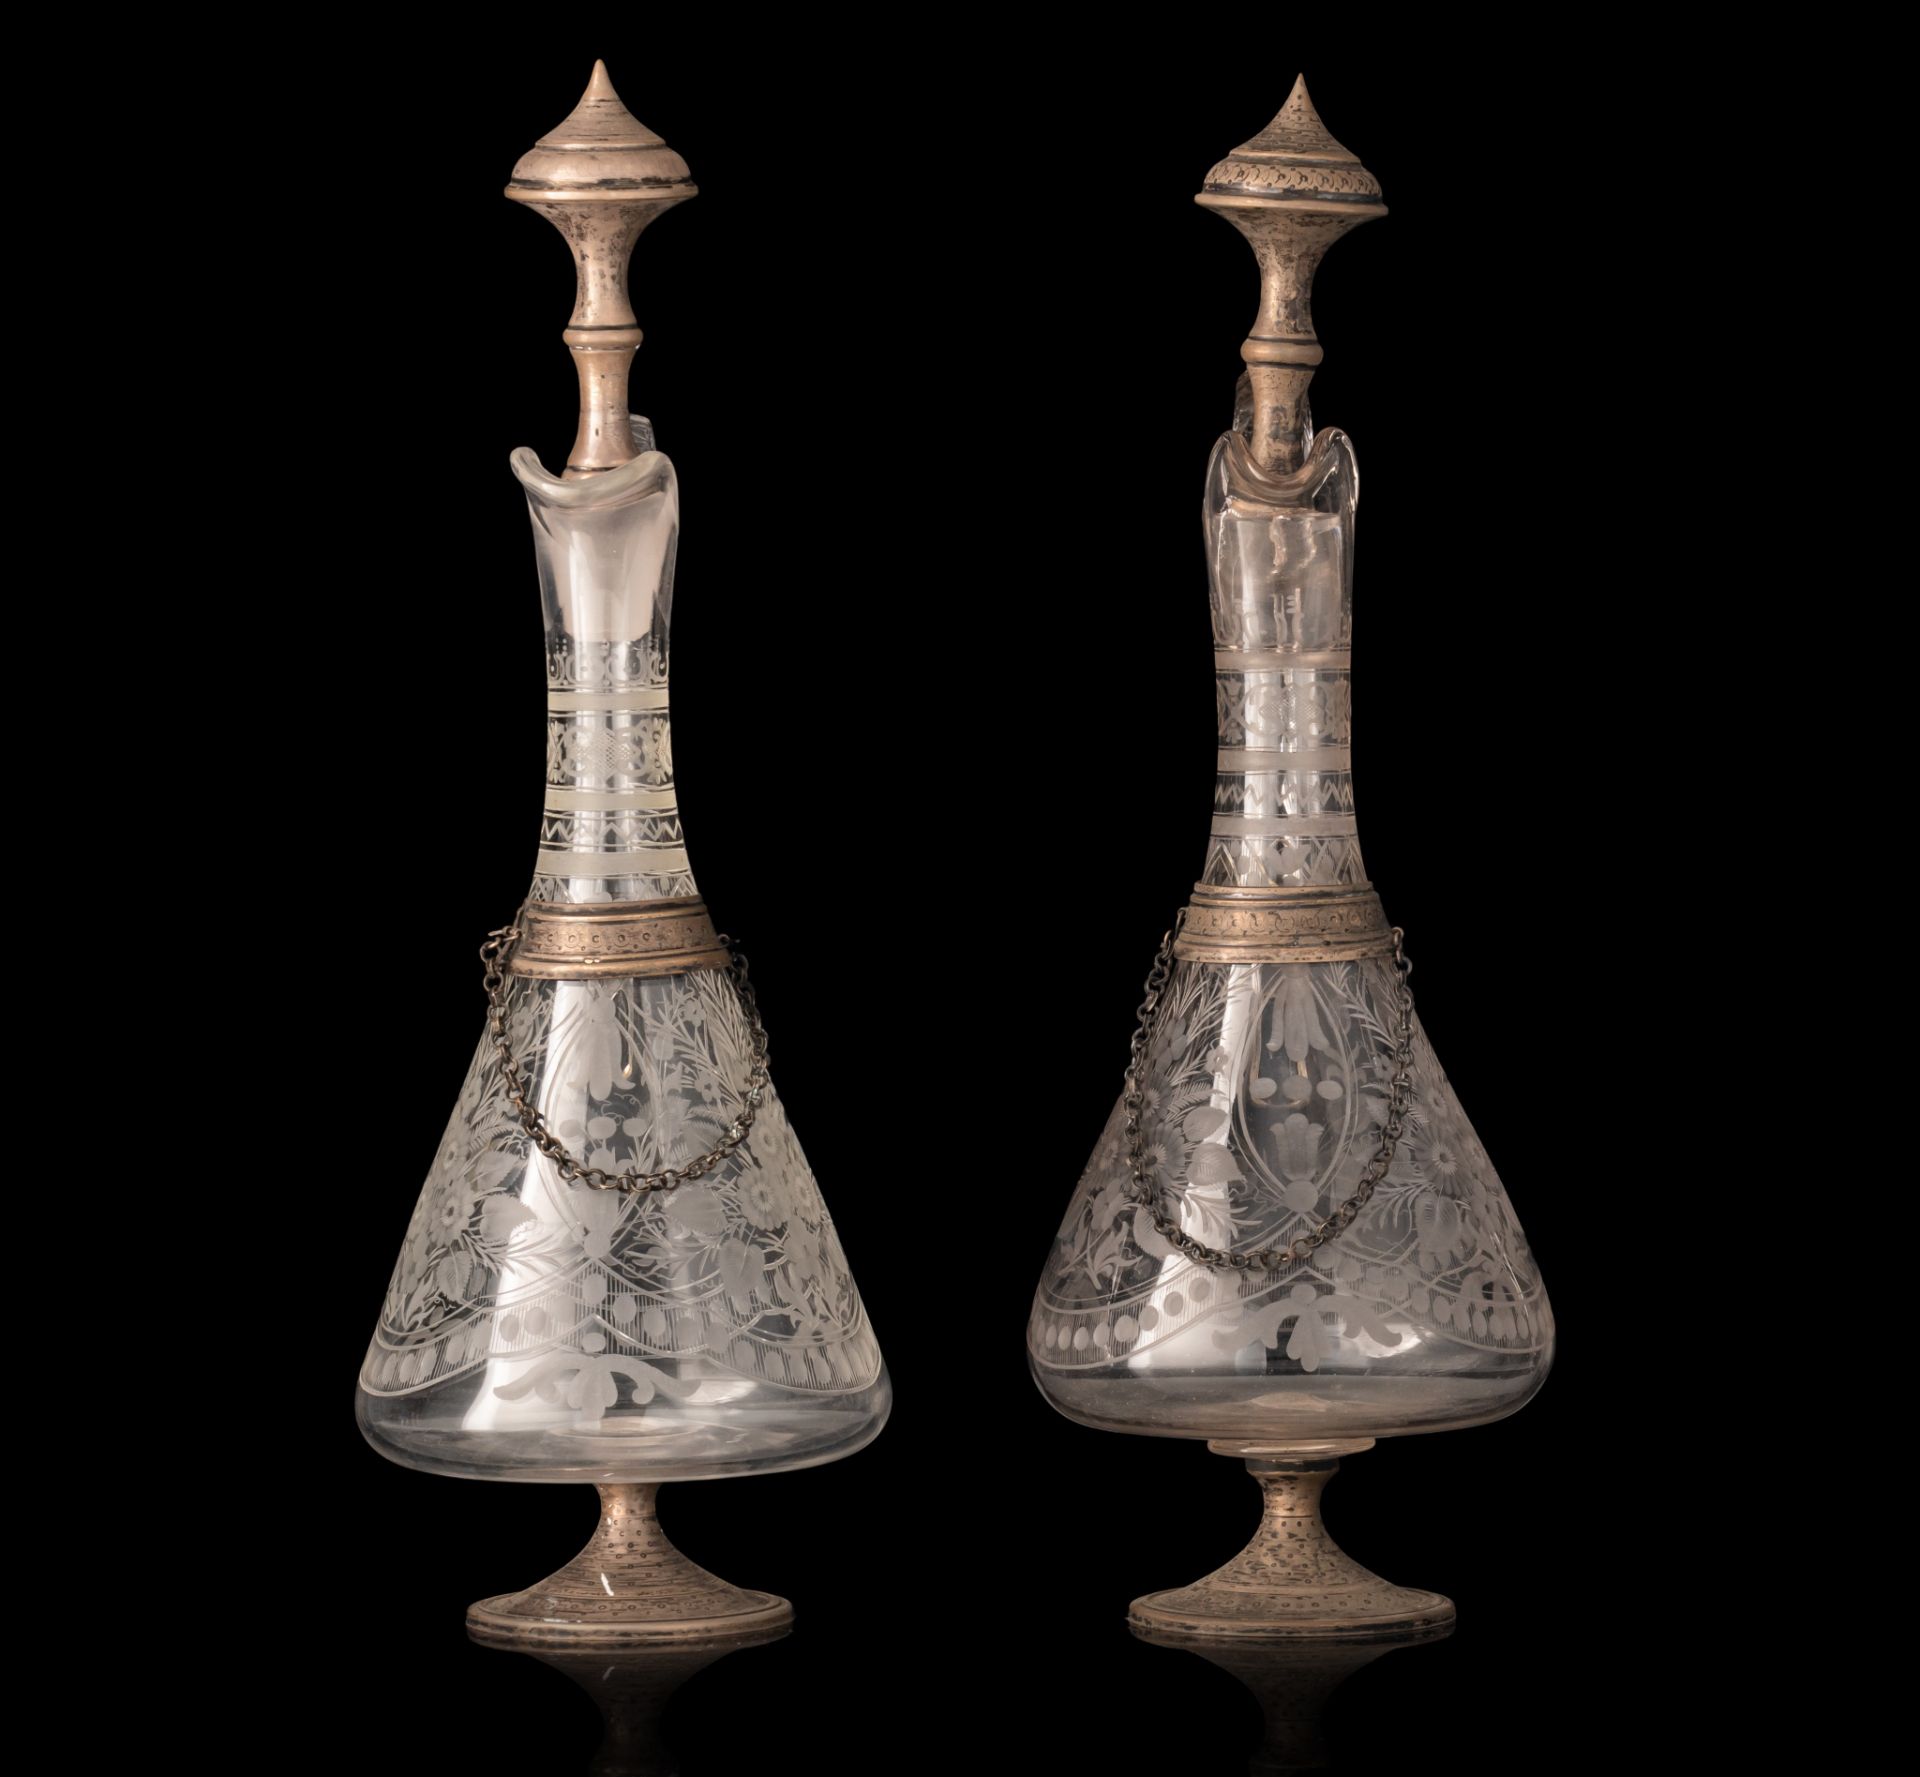 A pair of glass, silver-plated brass mounted decanters, H 41 - 42 cm - Image 2 of 7